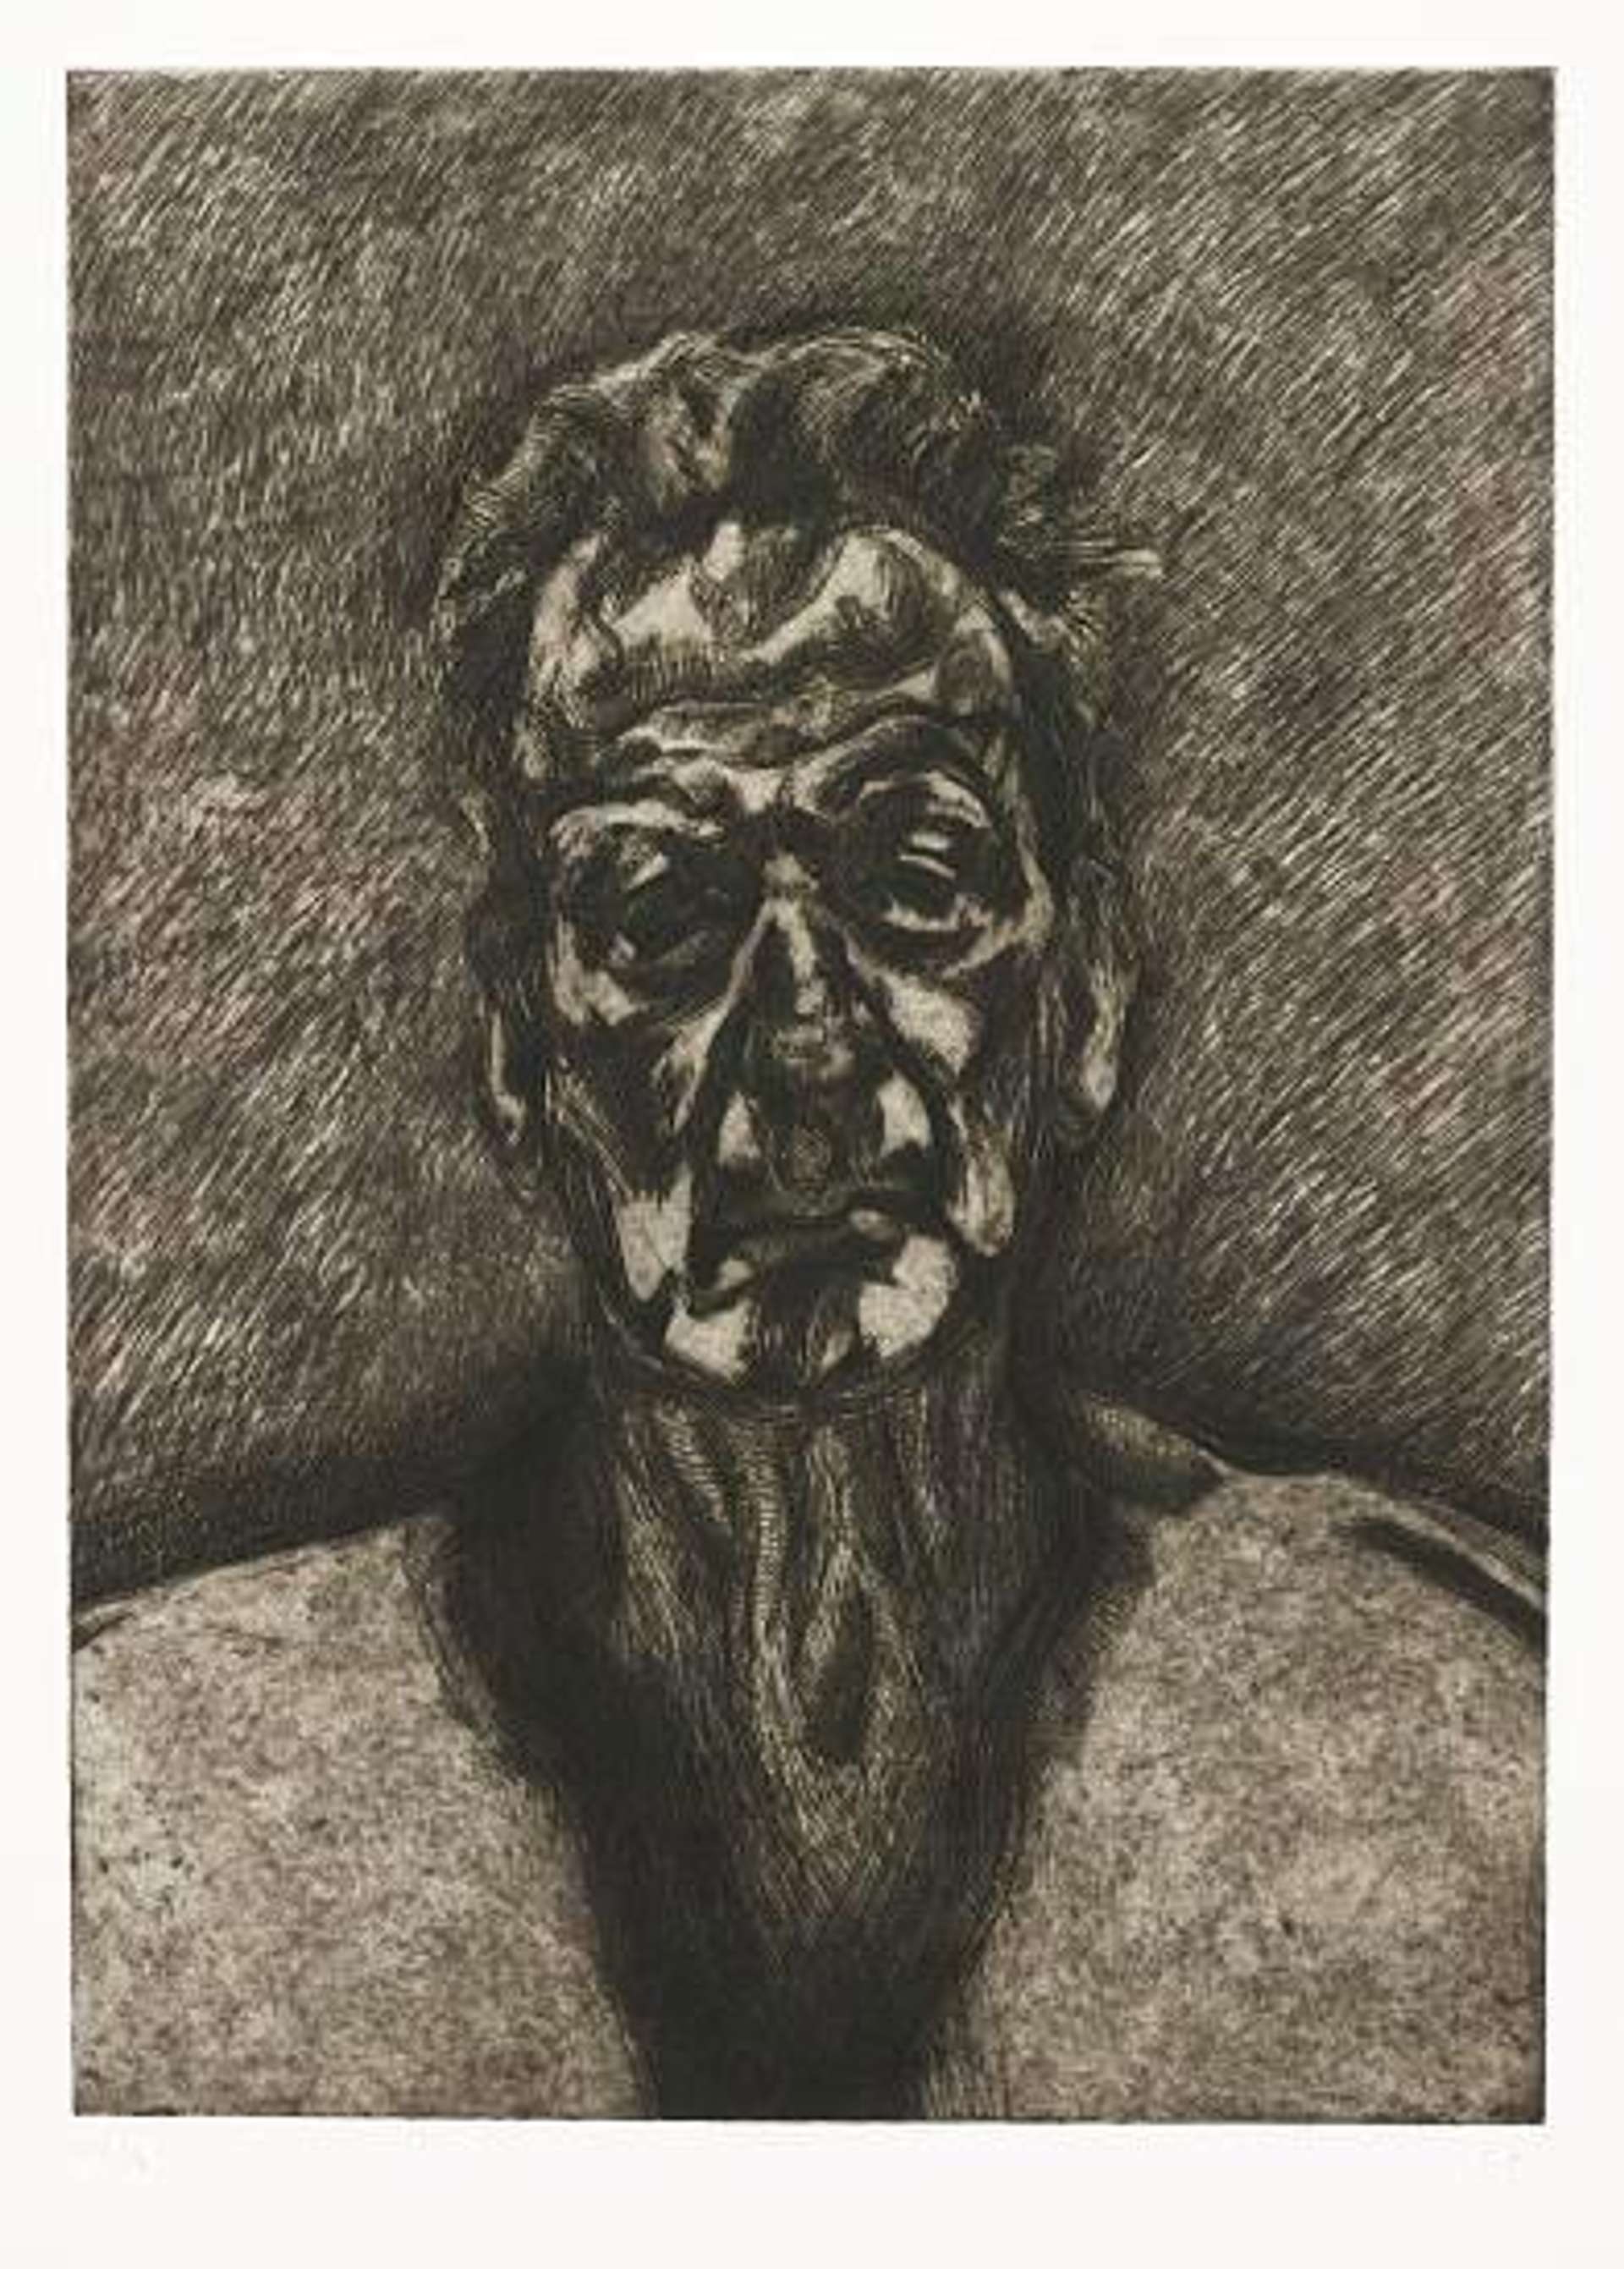 Lucian Freud's Self Portrait Reflection. A drawing of a man looking forward, with a deep, sombre facial expression 